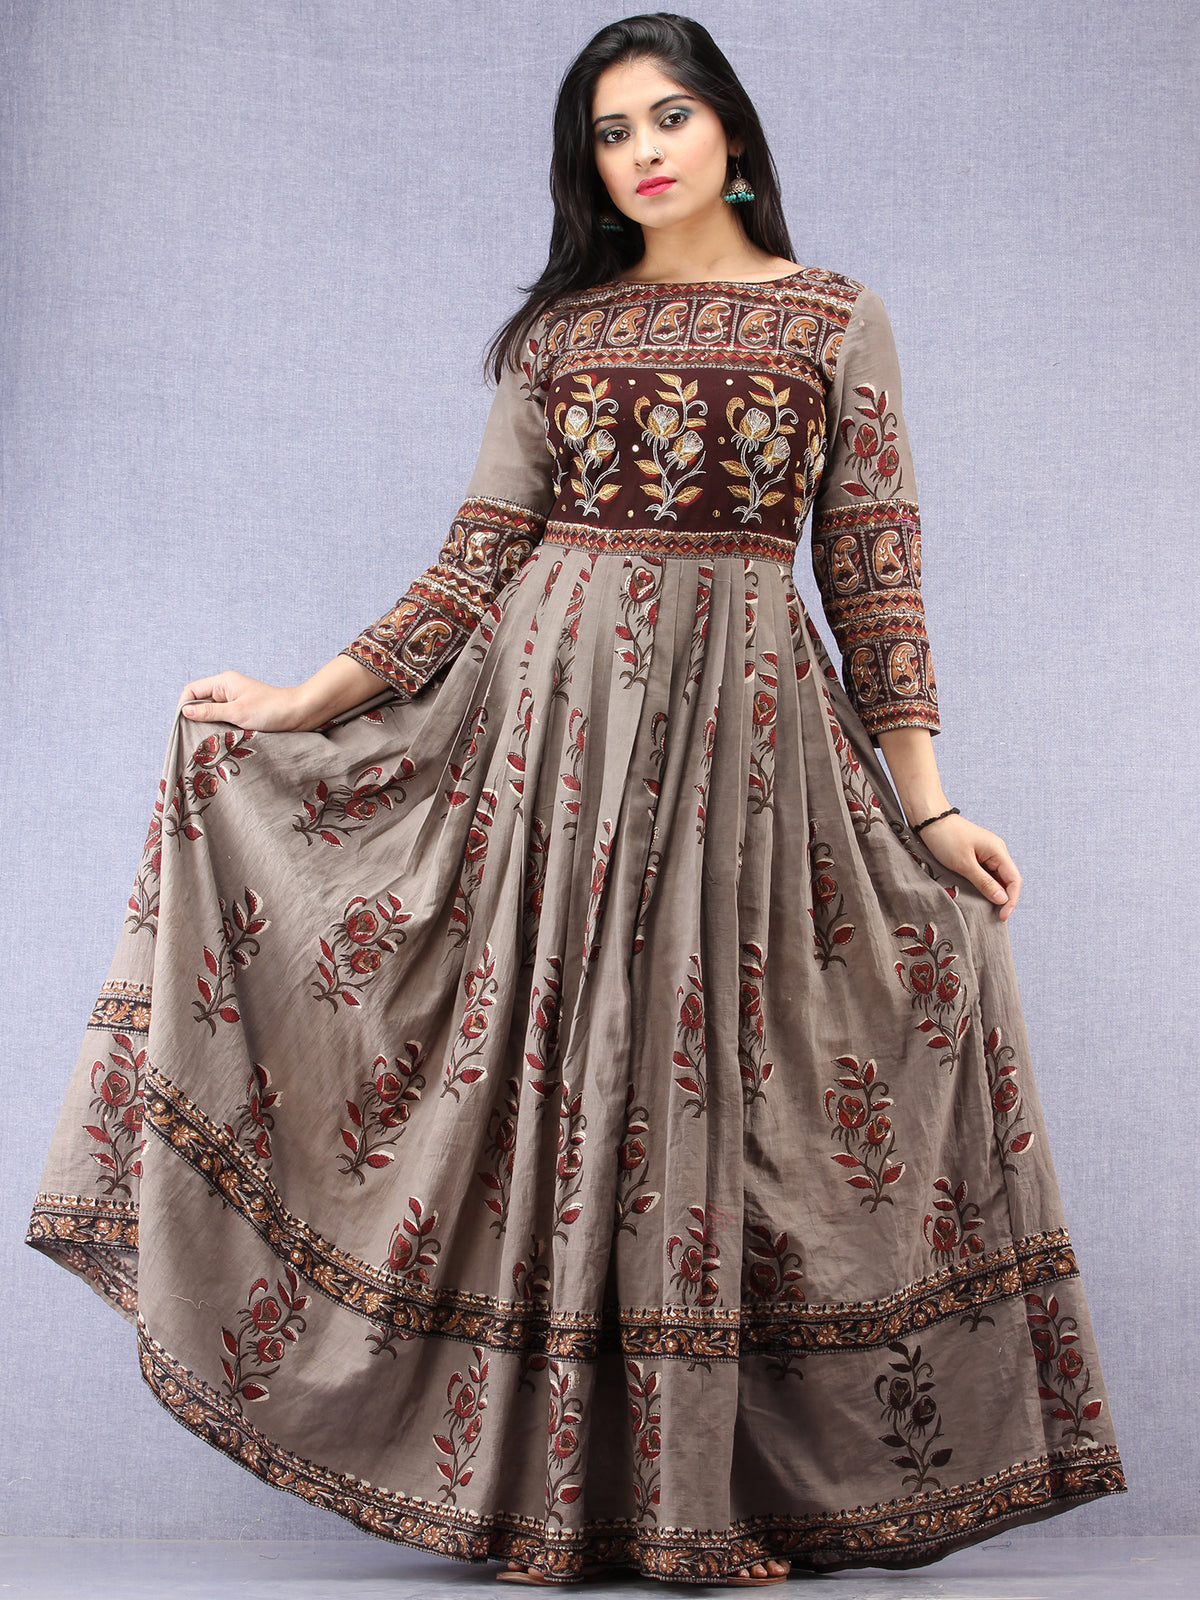 Naaz Falak - Hand Block Mughal Printed Long Cotton Embroidered Dress - DS106F001